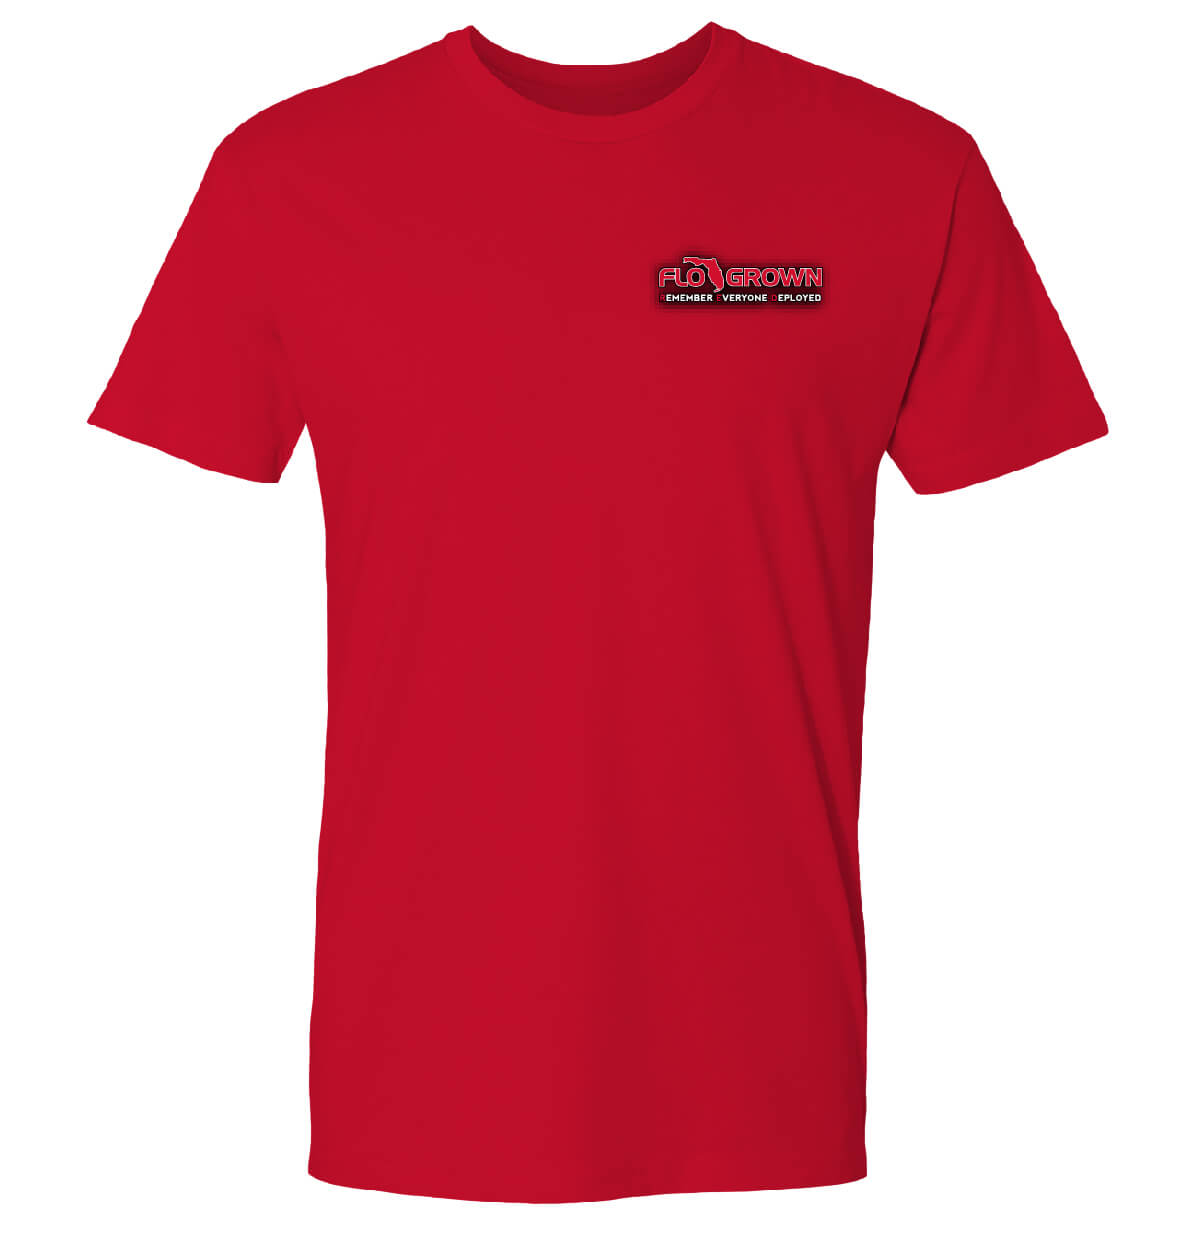 Wounded Veterans 21 Tee - Front